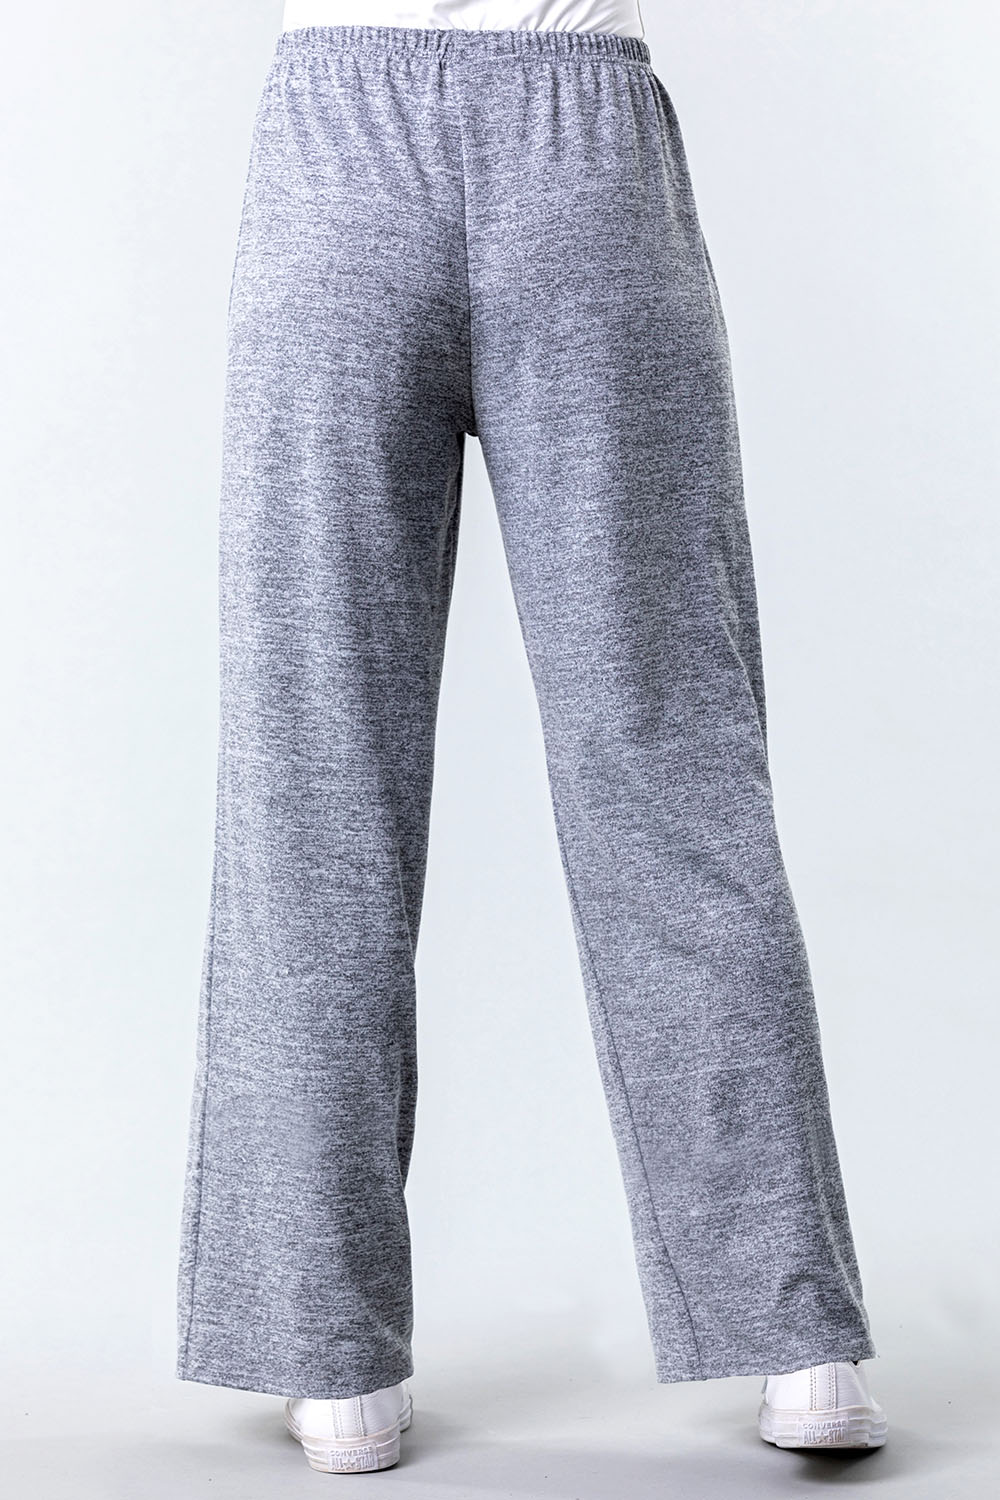 Grey Wide Leg Lounge Trousers, Image 2 of 4